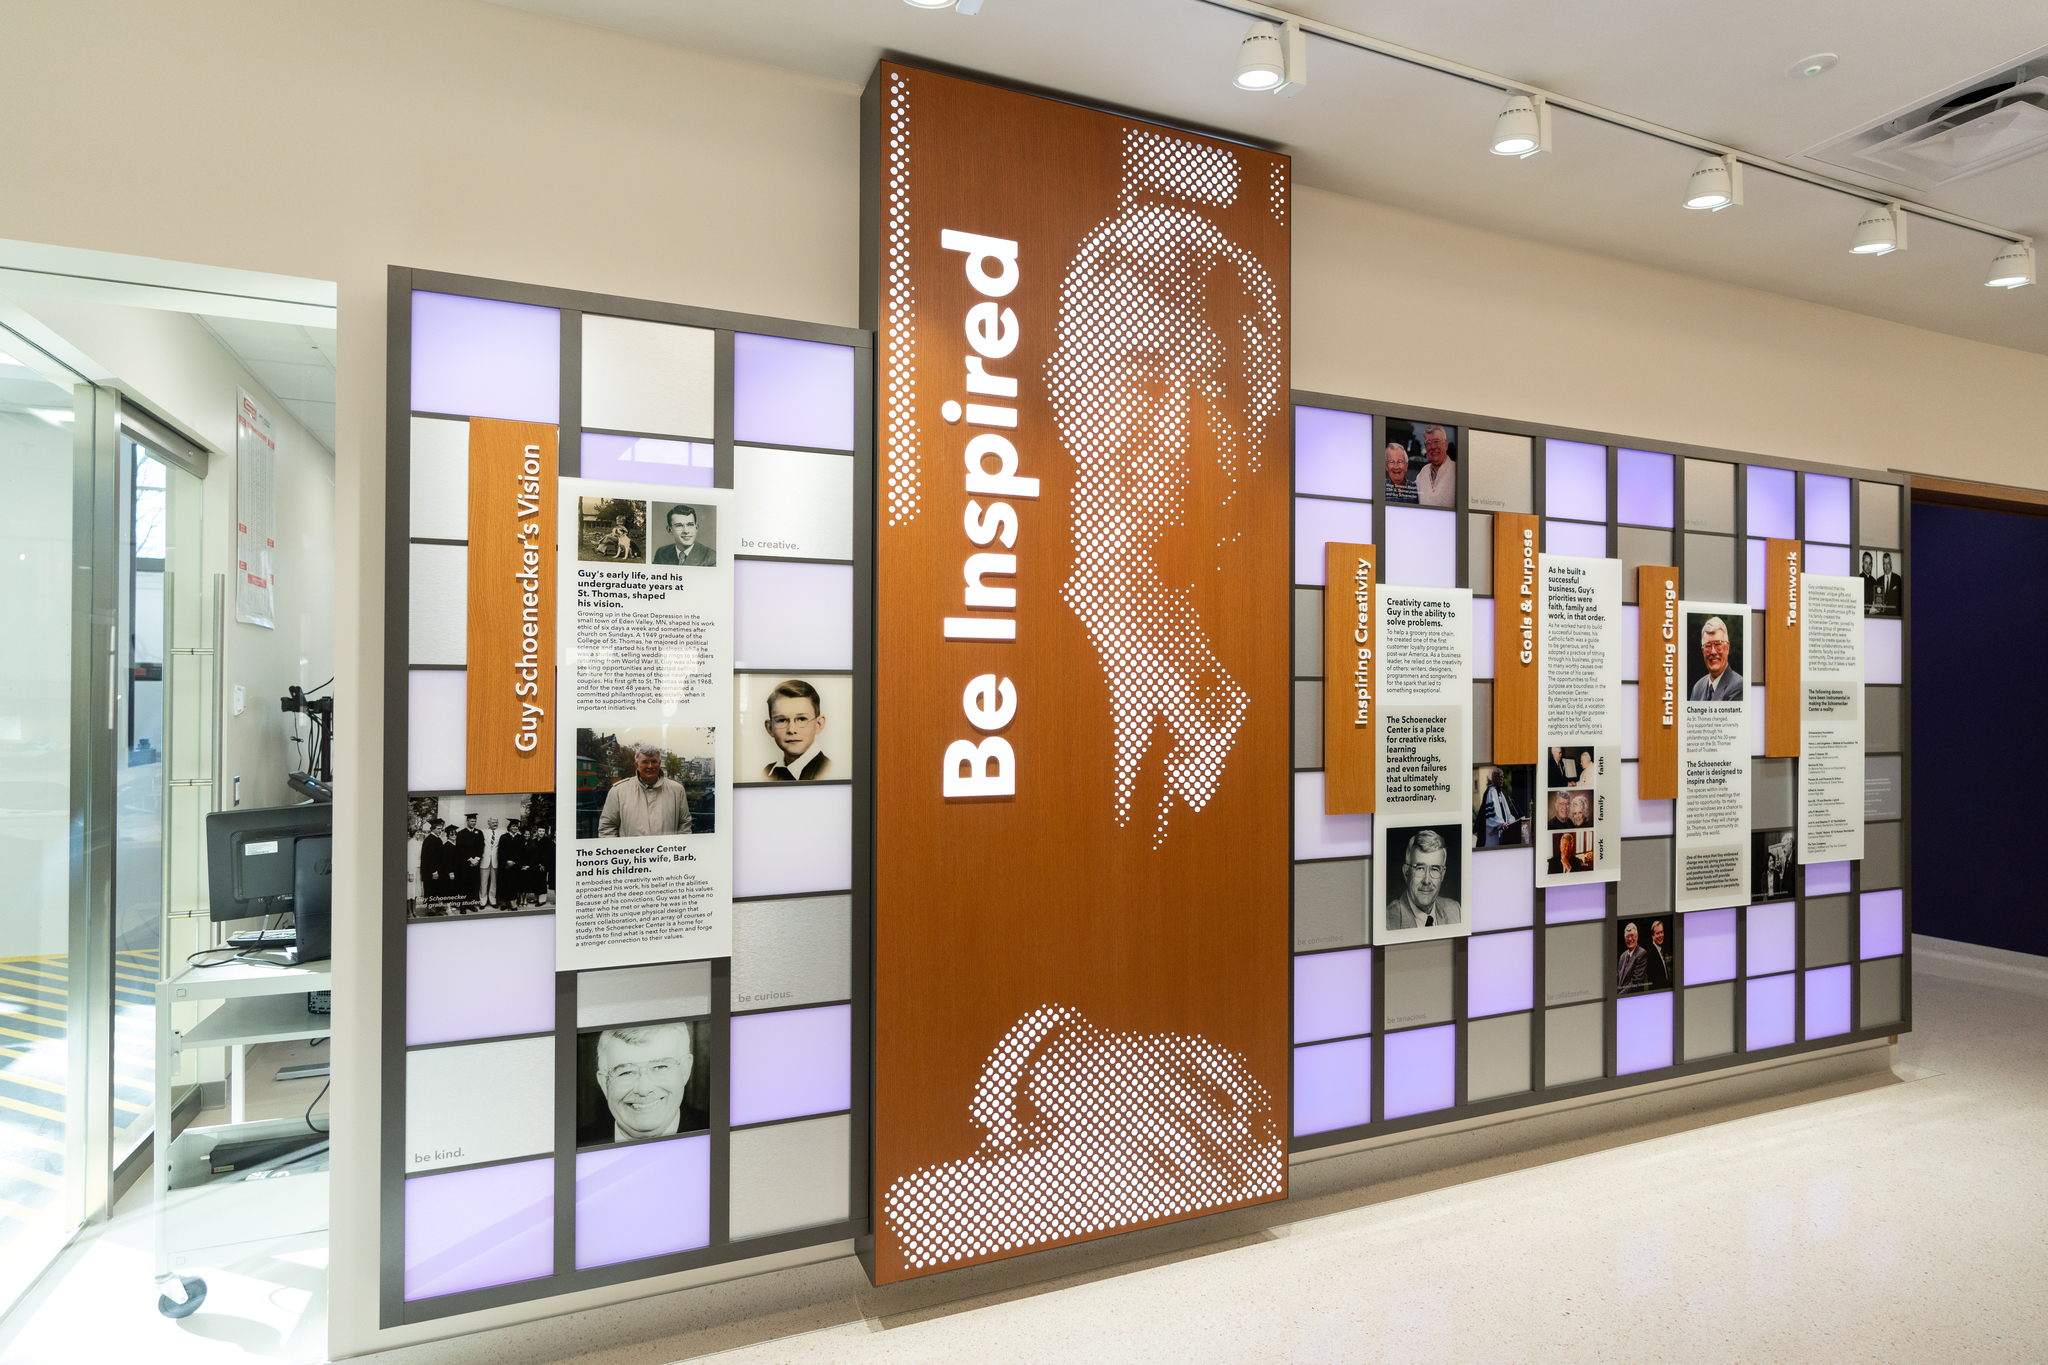 The donor wall installation highlighting the contributions of Guy Schoenecker and his family in the Schoenecker Center